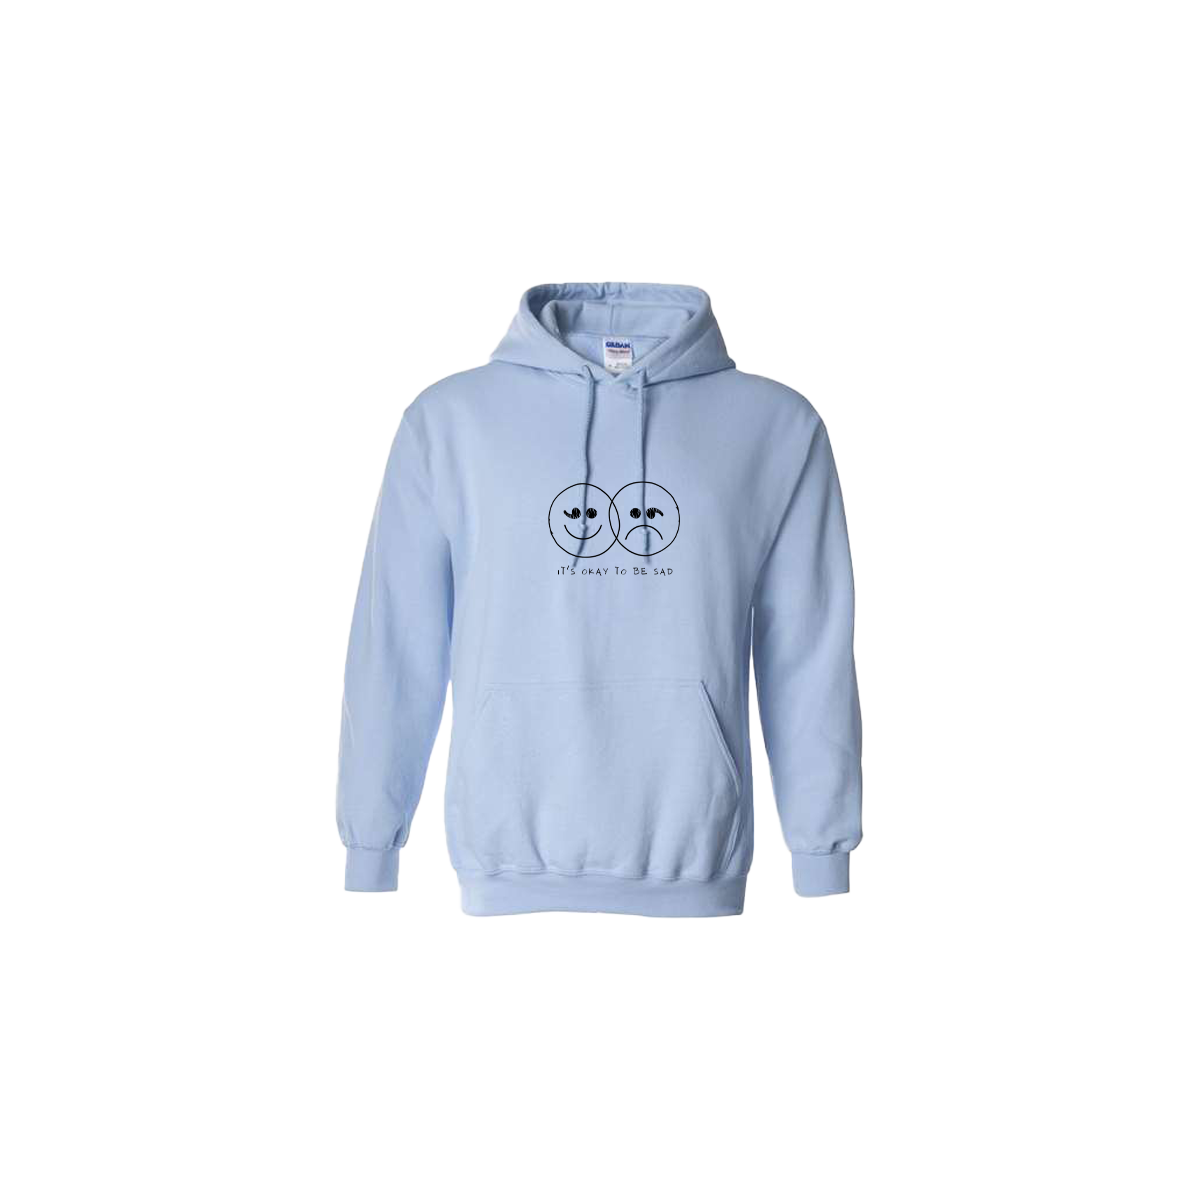 It's Okay to be Sad Double Smiley Face Embroidered Light Blue Hoodie - Mental Health Awareness Clothing